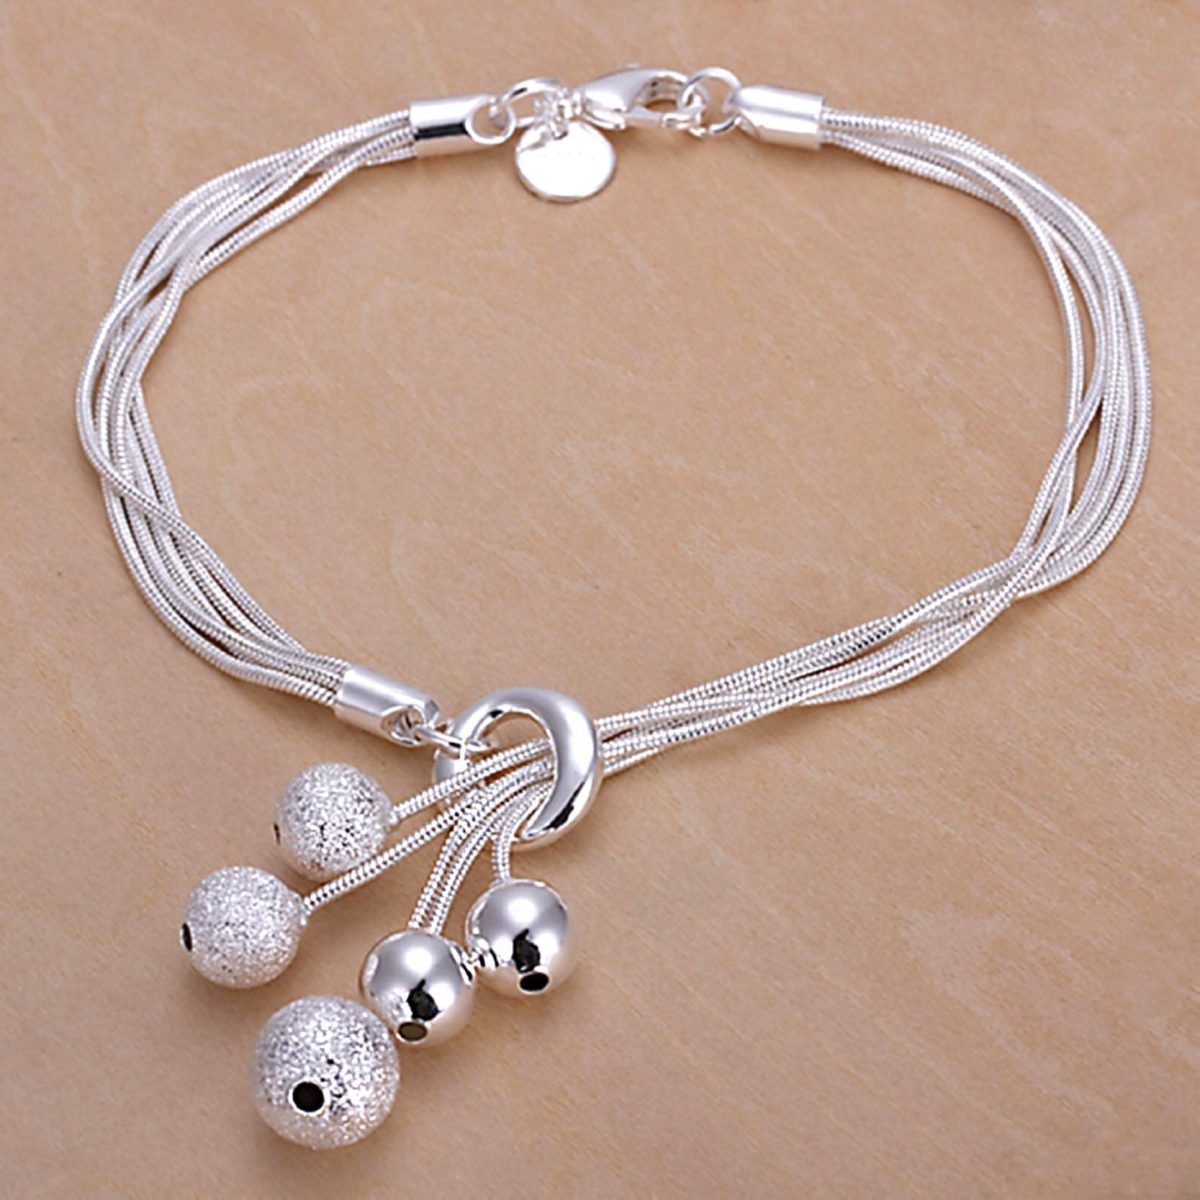 Silver Plated Small Beads Bracelet